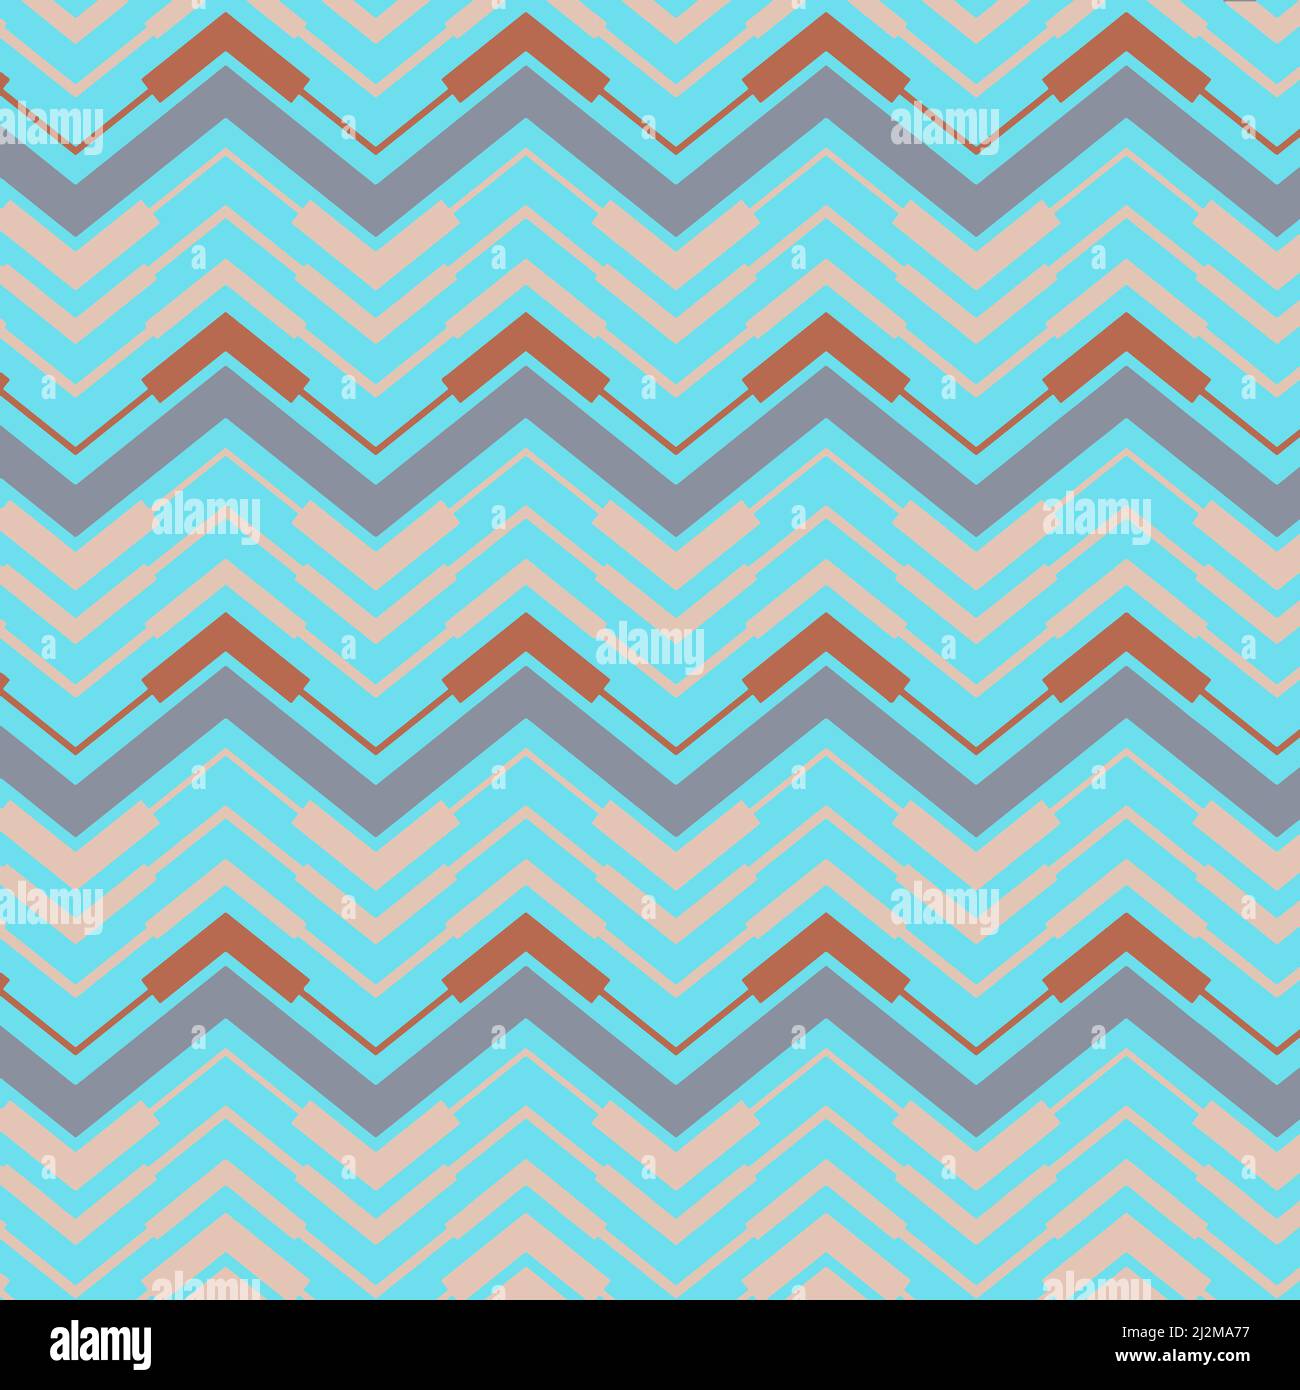 Country western pattern zigzag background in turquoise aqua, coral peach, and copper red with a different rick rack chevron pattern. Stock Photo